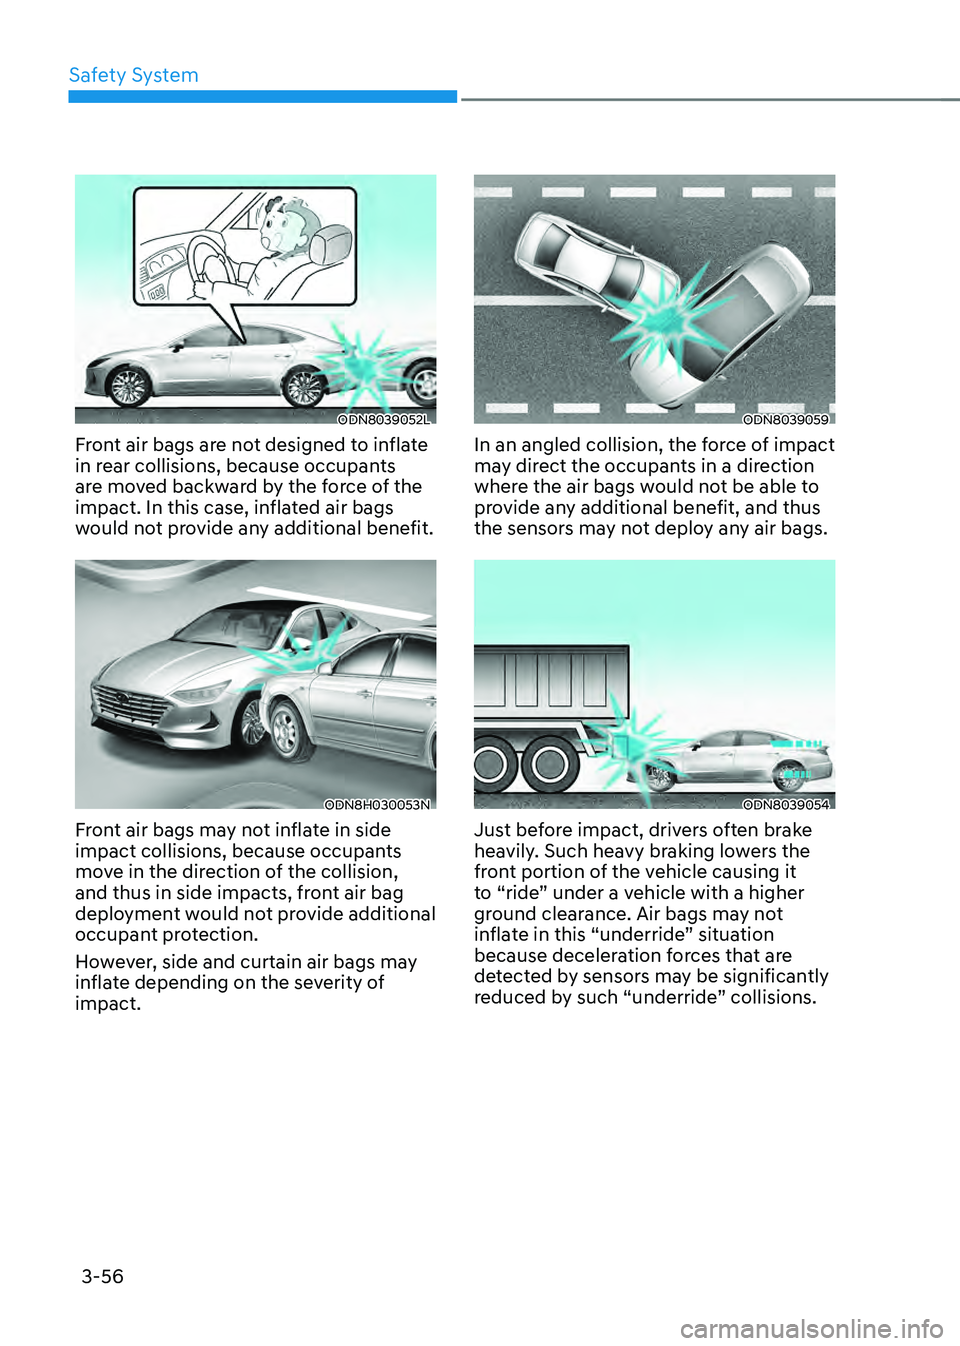 HYUNDAI SONATA HYBRID 2022  Owners Manual Safety System
3-56
ODN8039052L
Front air bags are not designed to inflate 
in rear collisions, because occupants 
are moved backward by the force of the 
impact. In this case, inflated air bags 
would